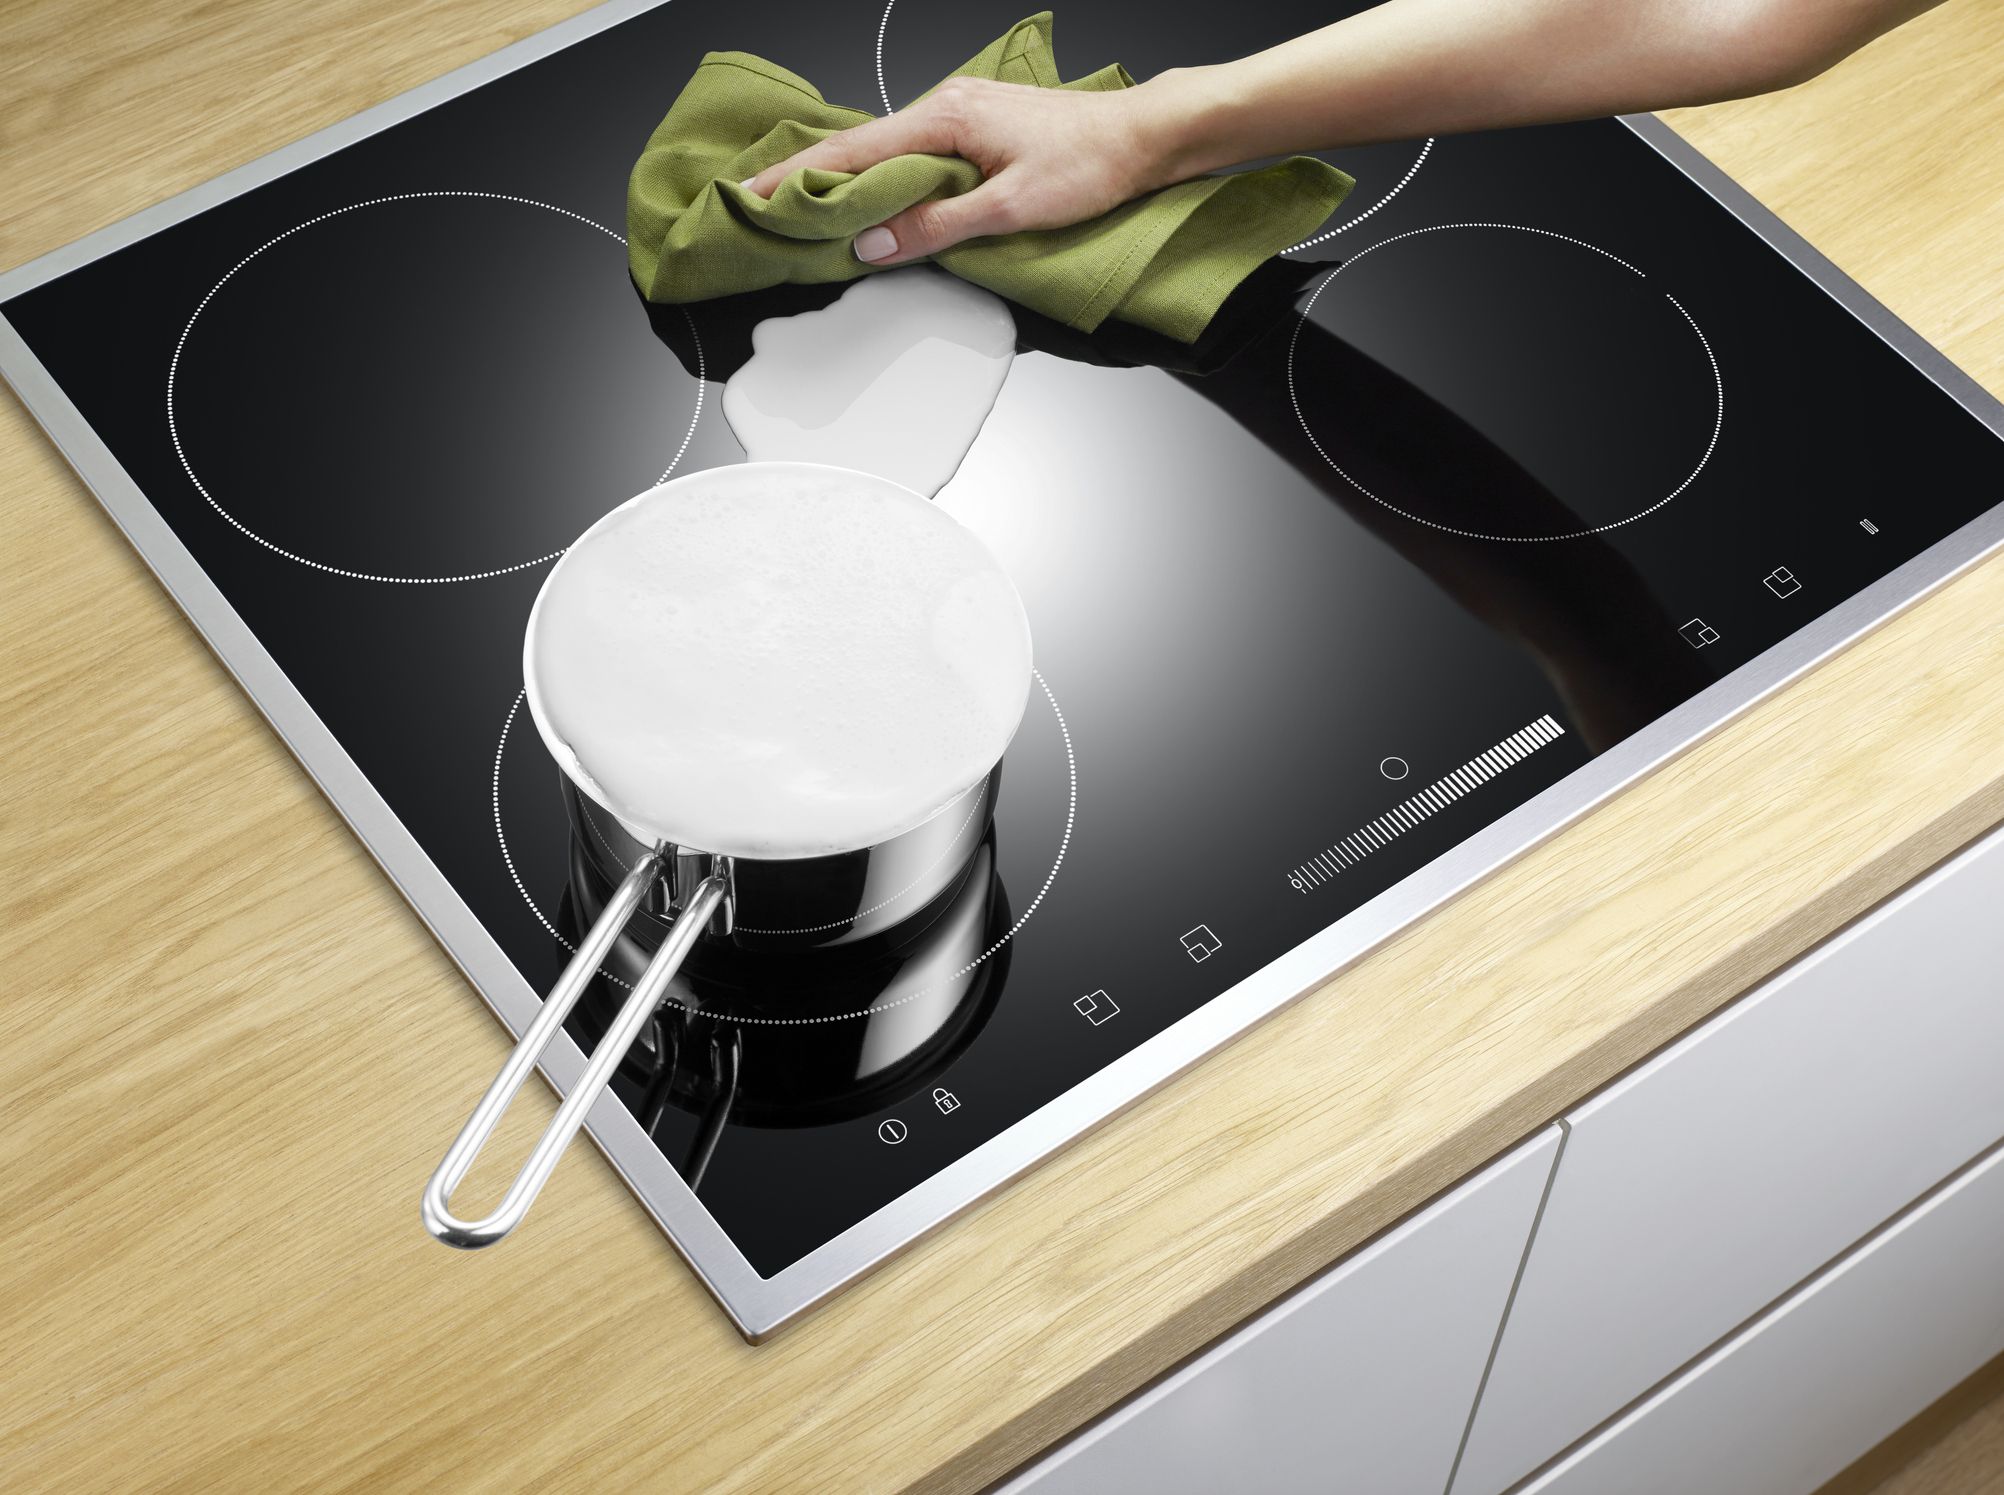 https://hips.hearstapps.com/hmg-prod/images/cleaning-set-top-stove-royalty-free-image-1695240415.jpg